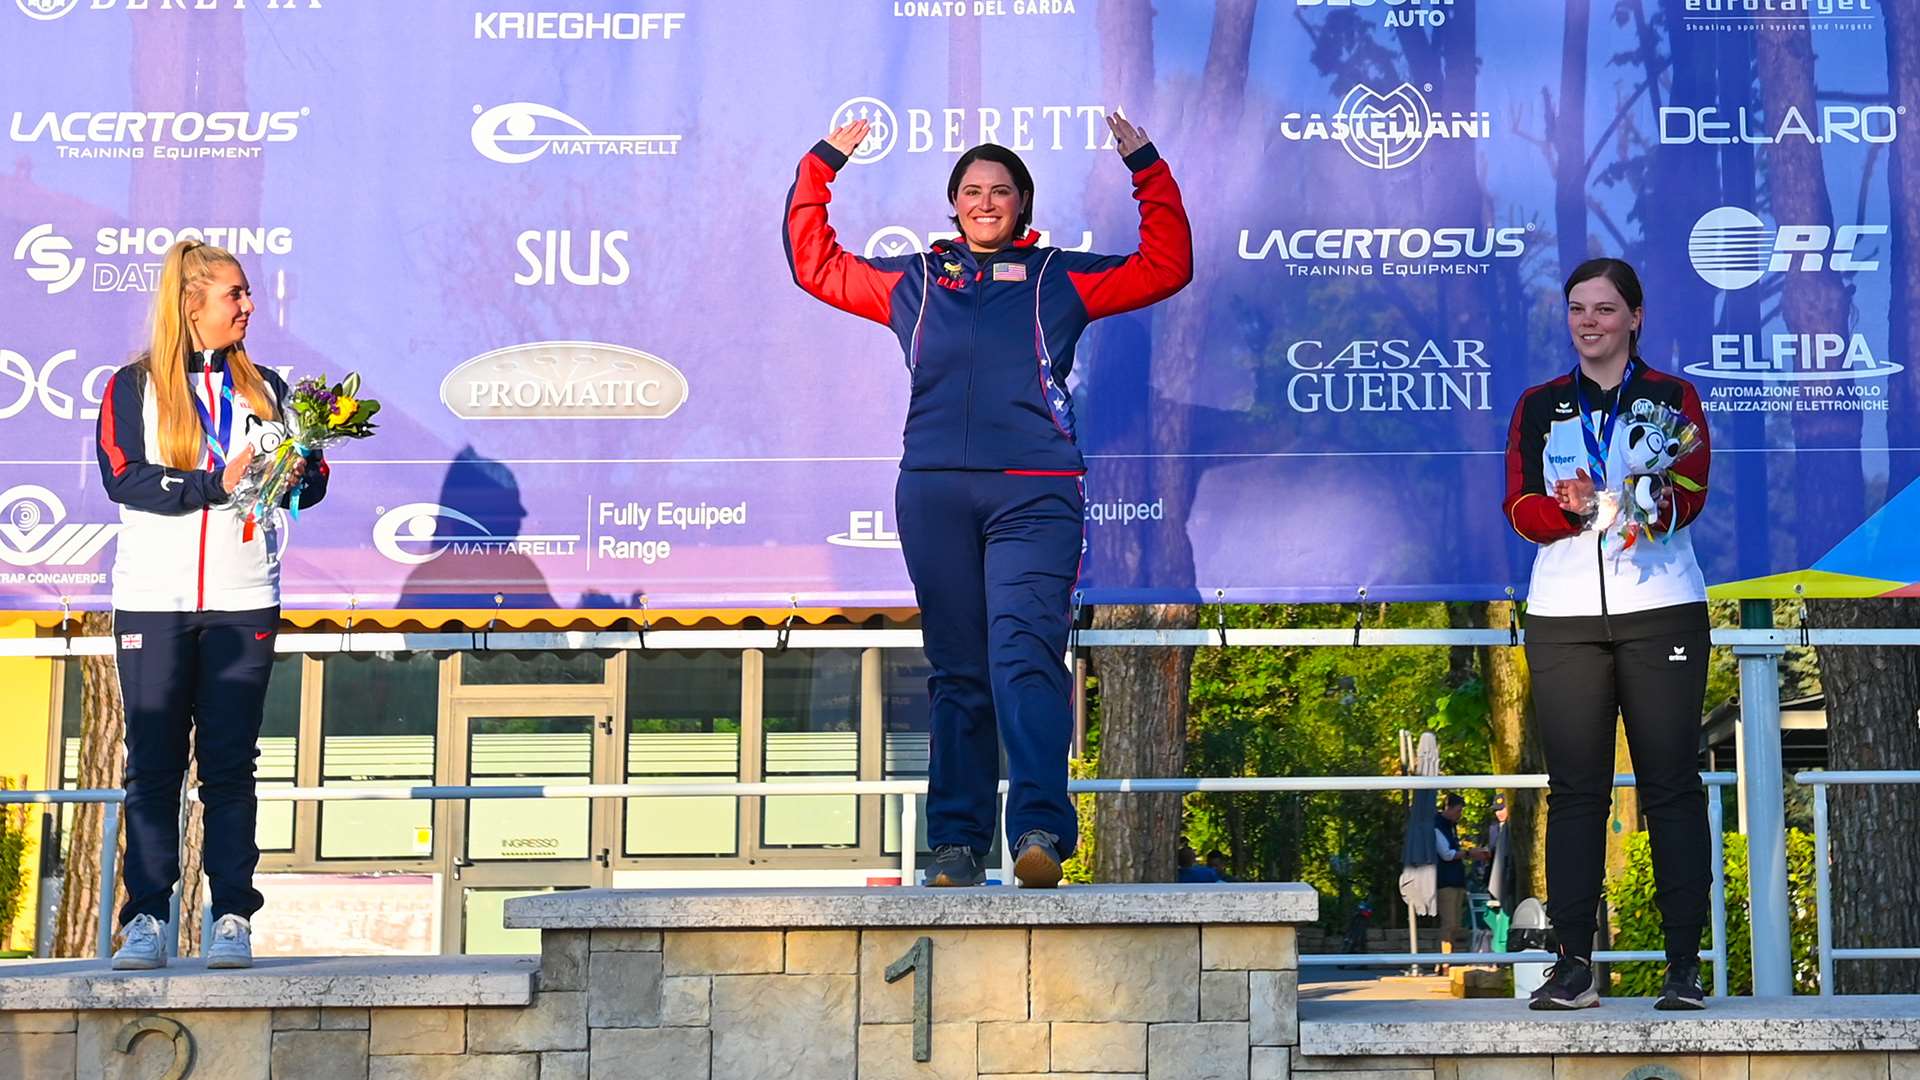 Caitlin Connor stands center podium in Italy